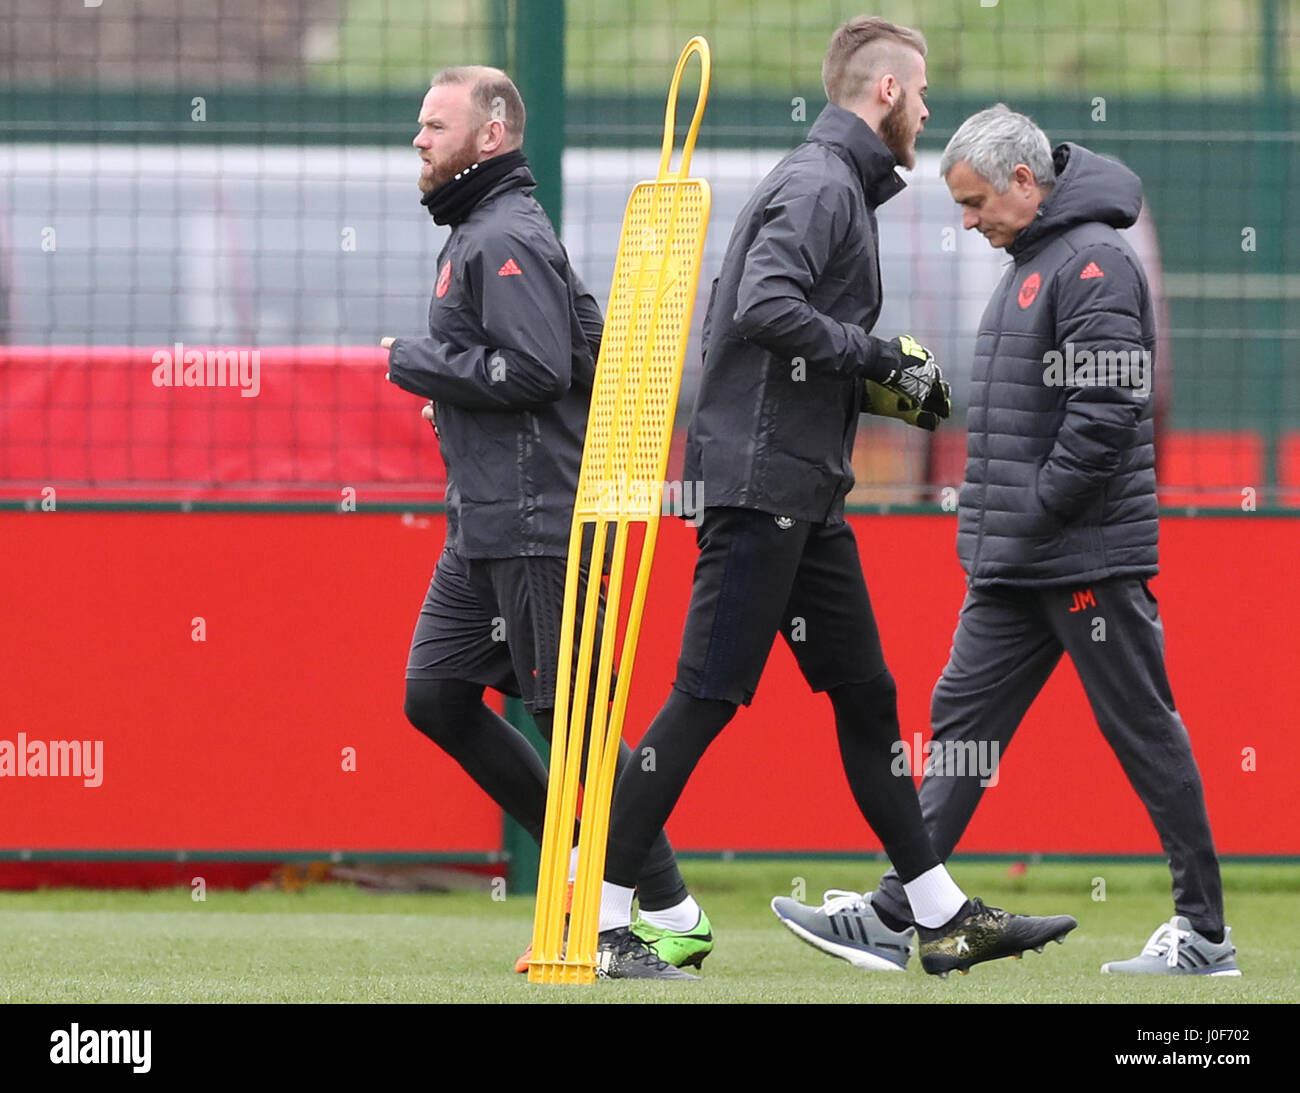 Manchester United manager Jose Mourinho (right) and Wayne Rooney during the training session at the Aon Training Complex, Carrington. PRESS ASSOCIATION Photo. Picture date: Wednesday April 12, 2017. See PA story SOCCER Man Utd. Photo credit should read: Martin Rickett/PA Wire Stock Photo